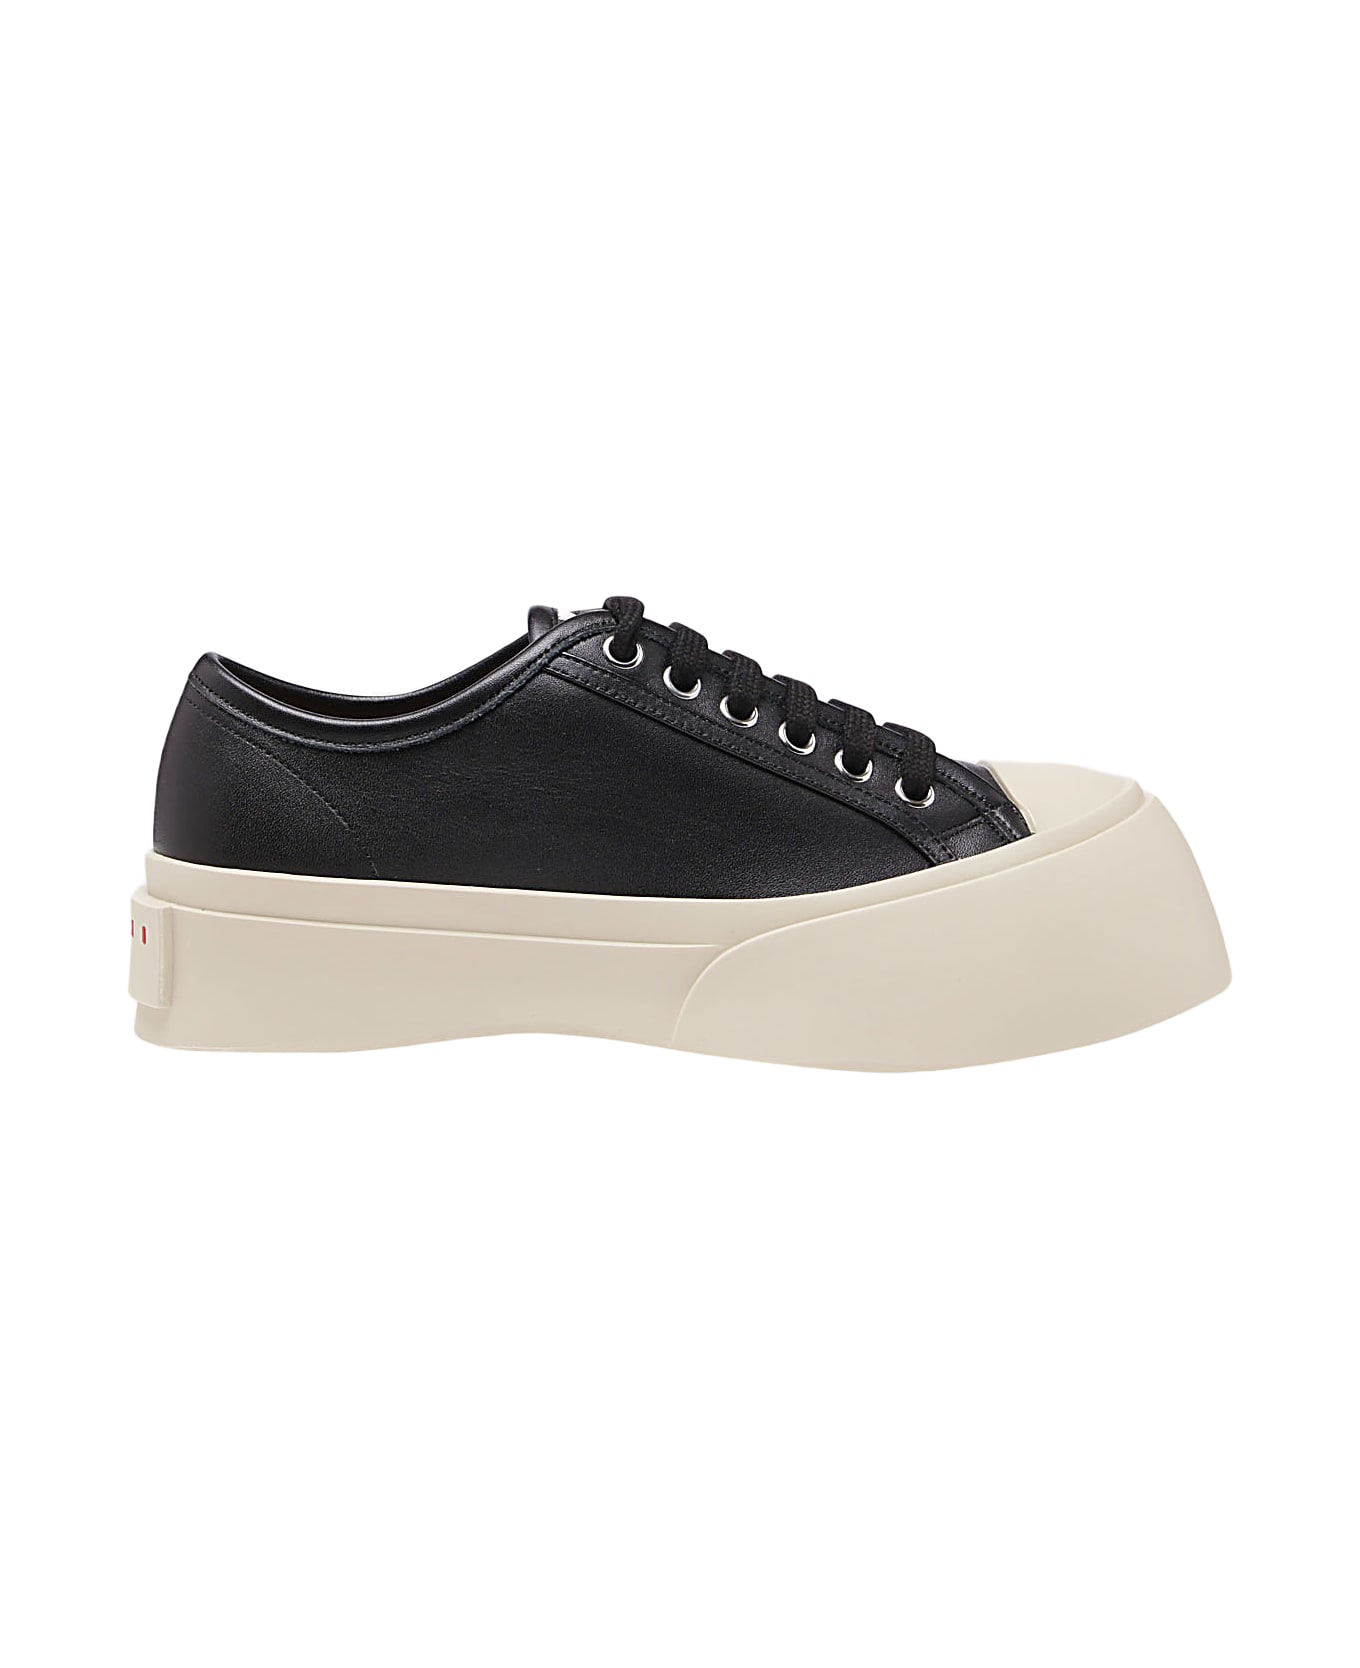 Marni Black And White Leather Pablo Sneakers - Black ウェッジシューズ